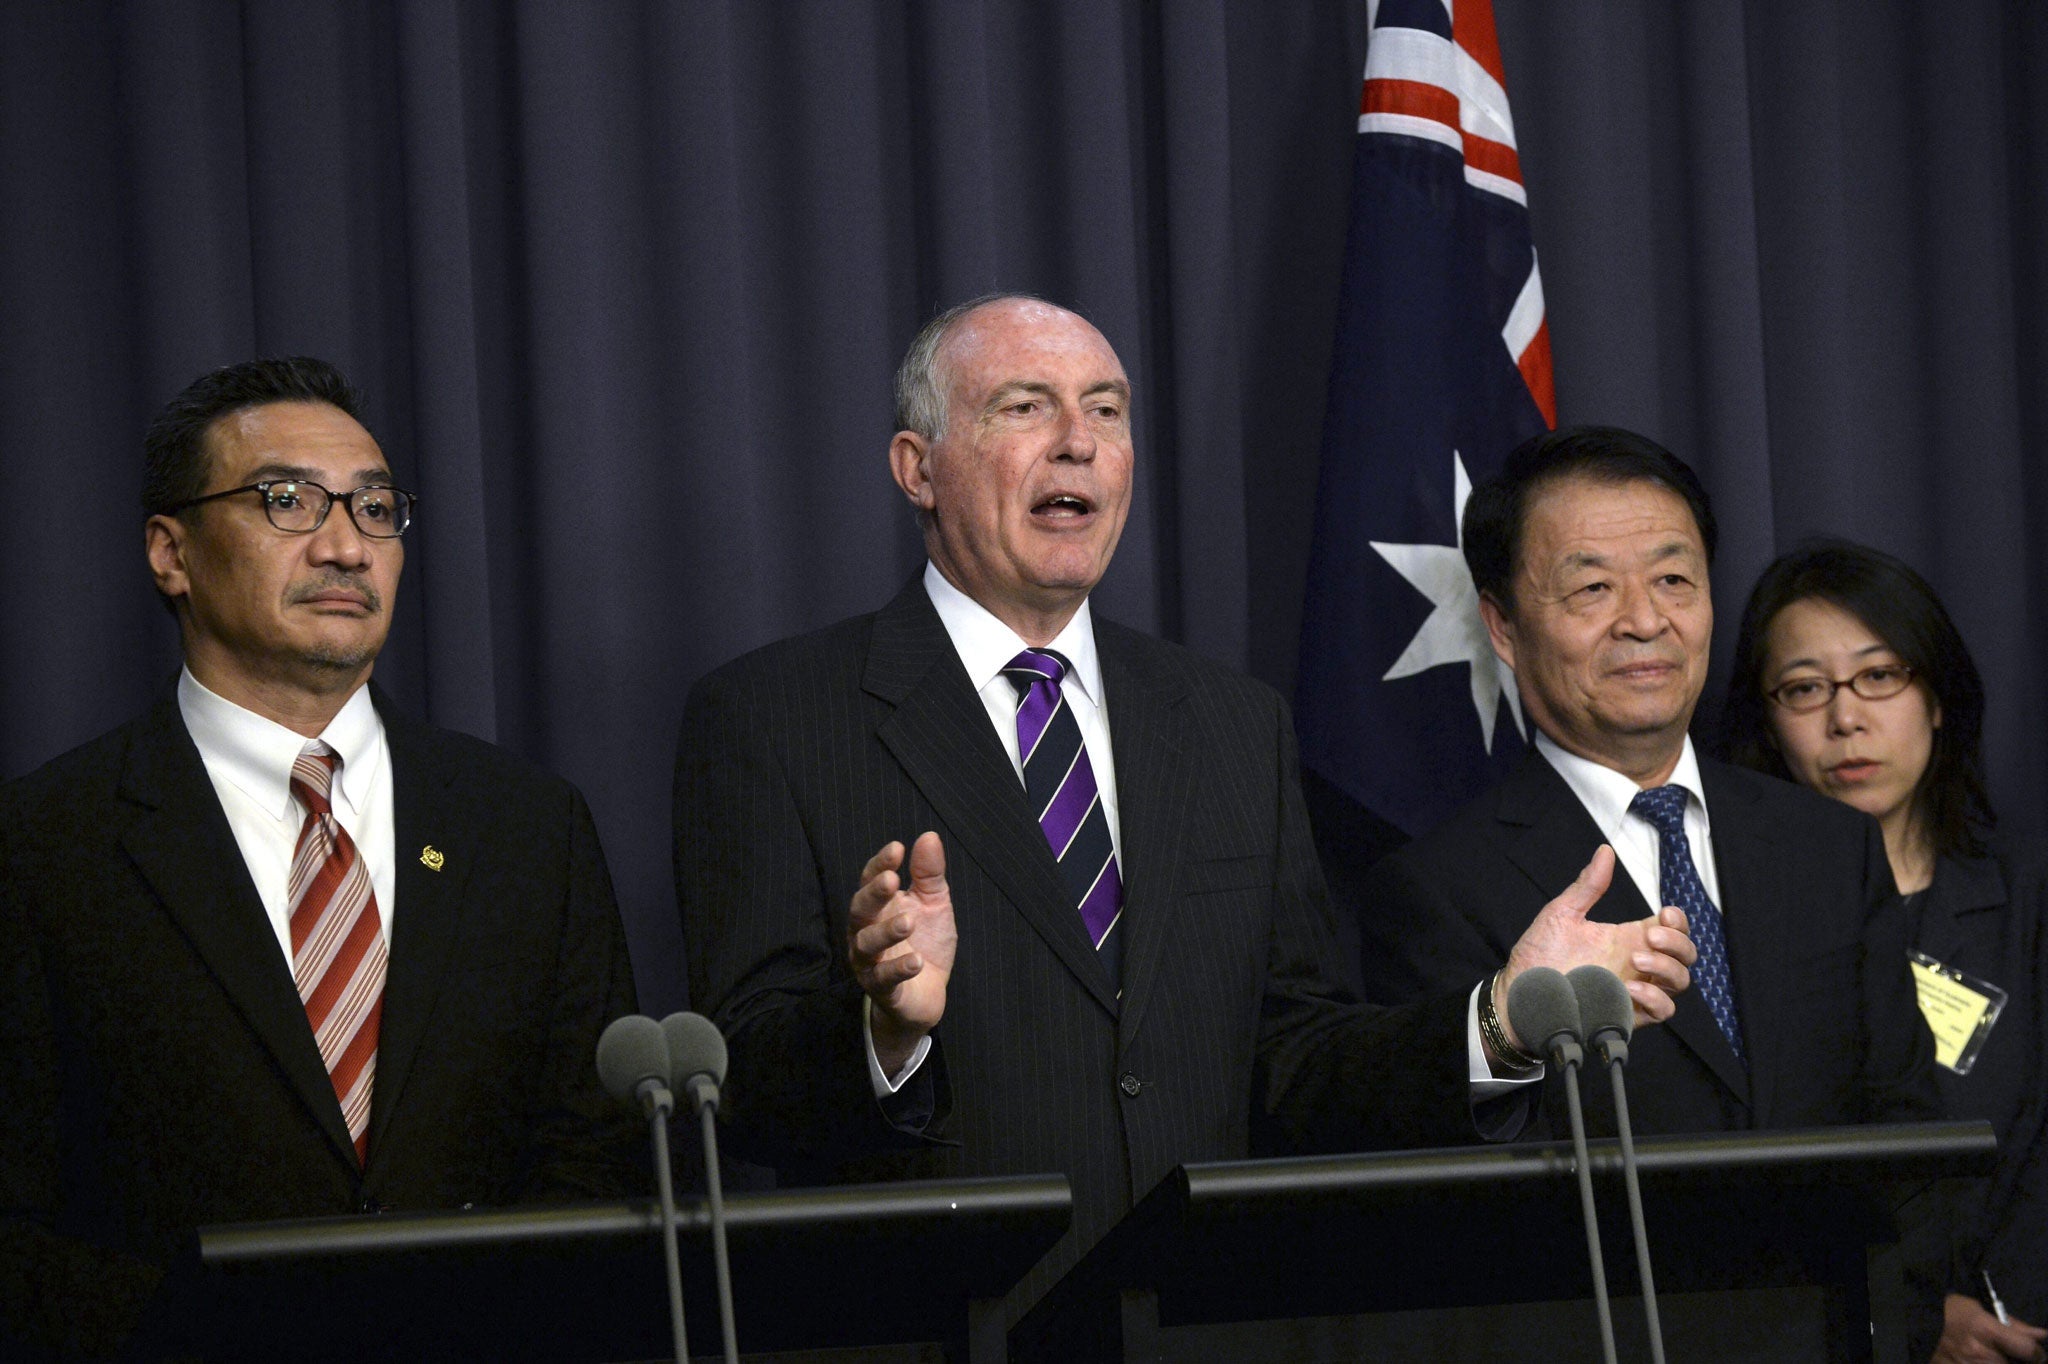 Australian transport minister Warren Truss (C) during a press conference with Malaysian acting transport minister Hishamuddin Hussein (L) and China's transport minister Yang Chuantang (2-R) in Canberra, Australia, 5 May 2014